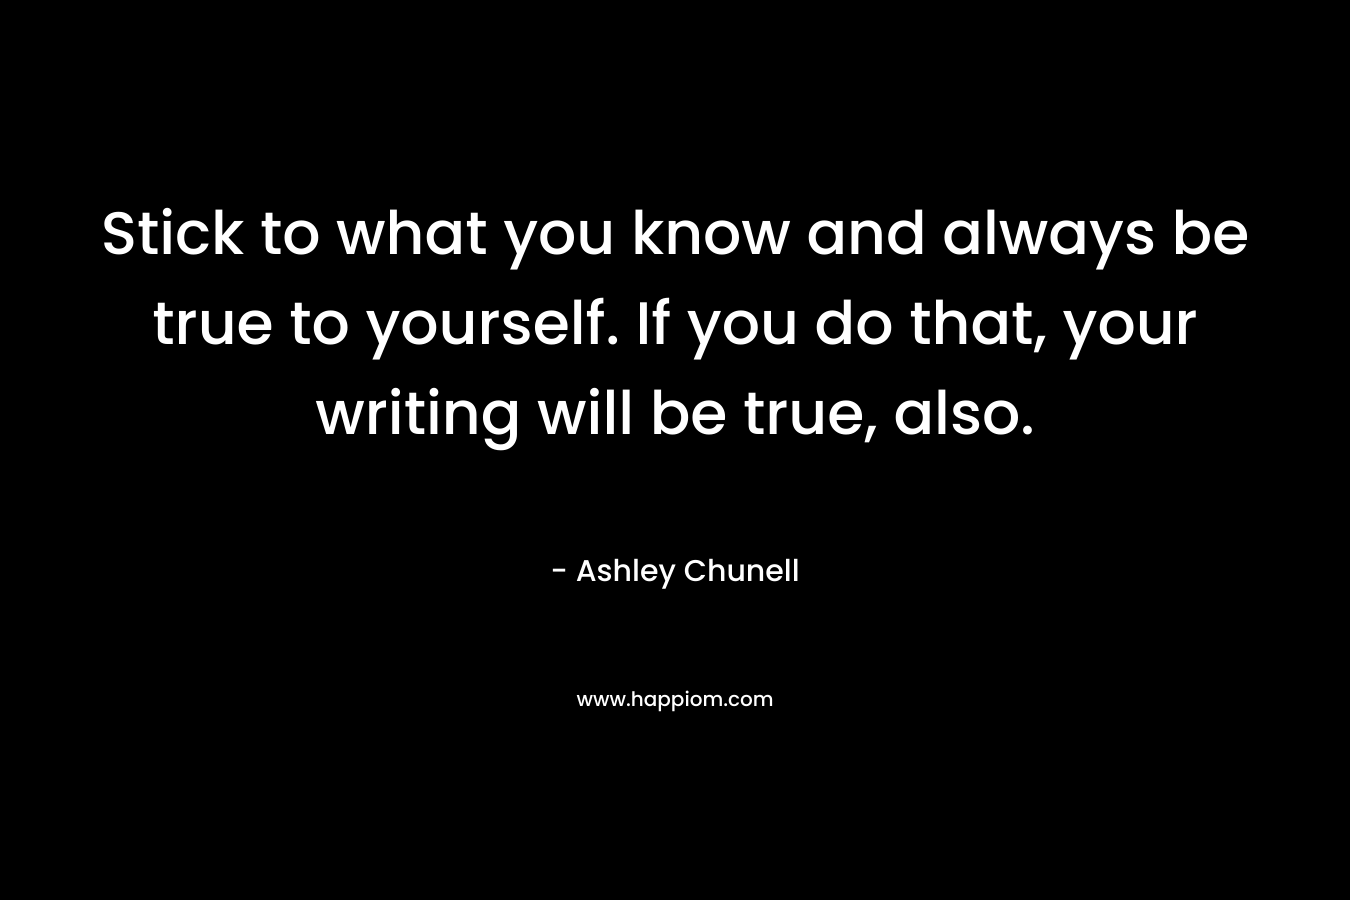 Stick to what you know and always be true to yourself. If you do that, your writing will be true, also.